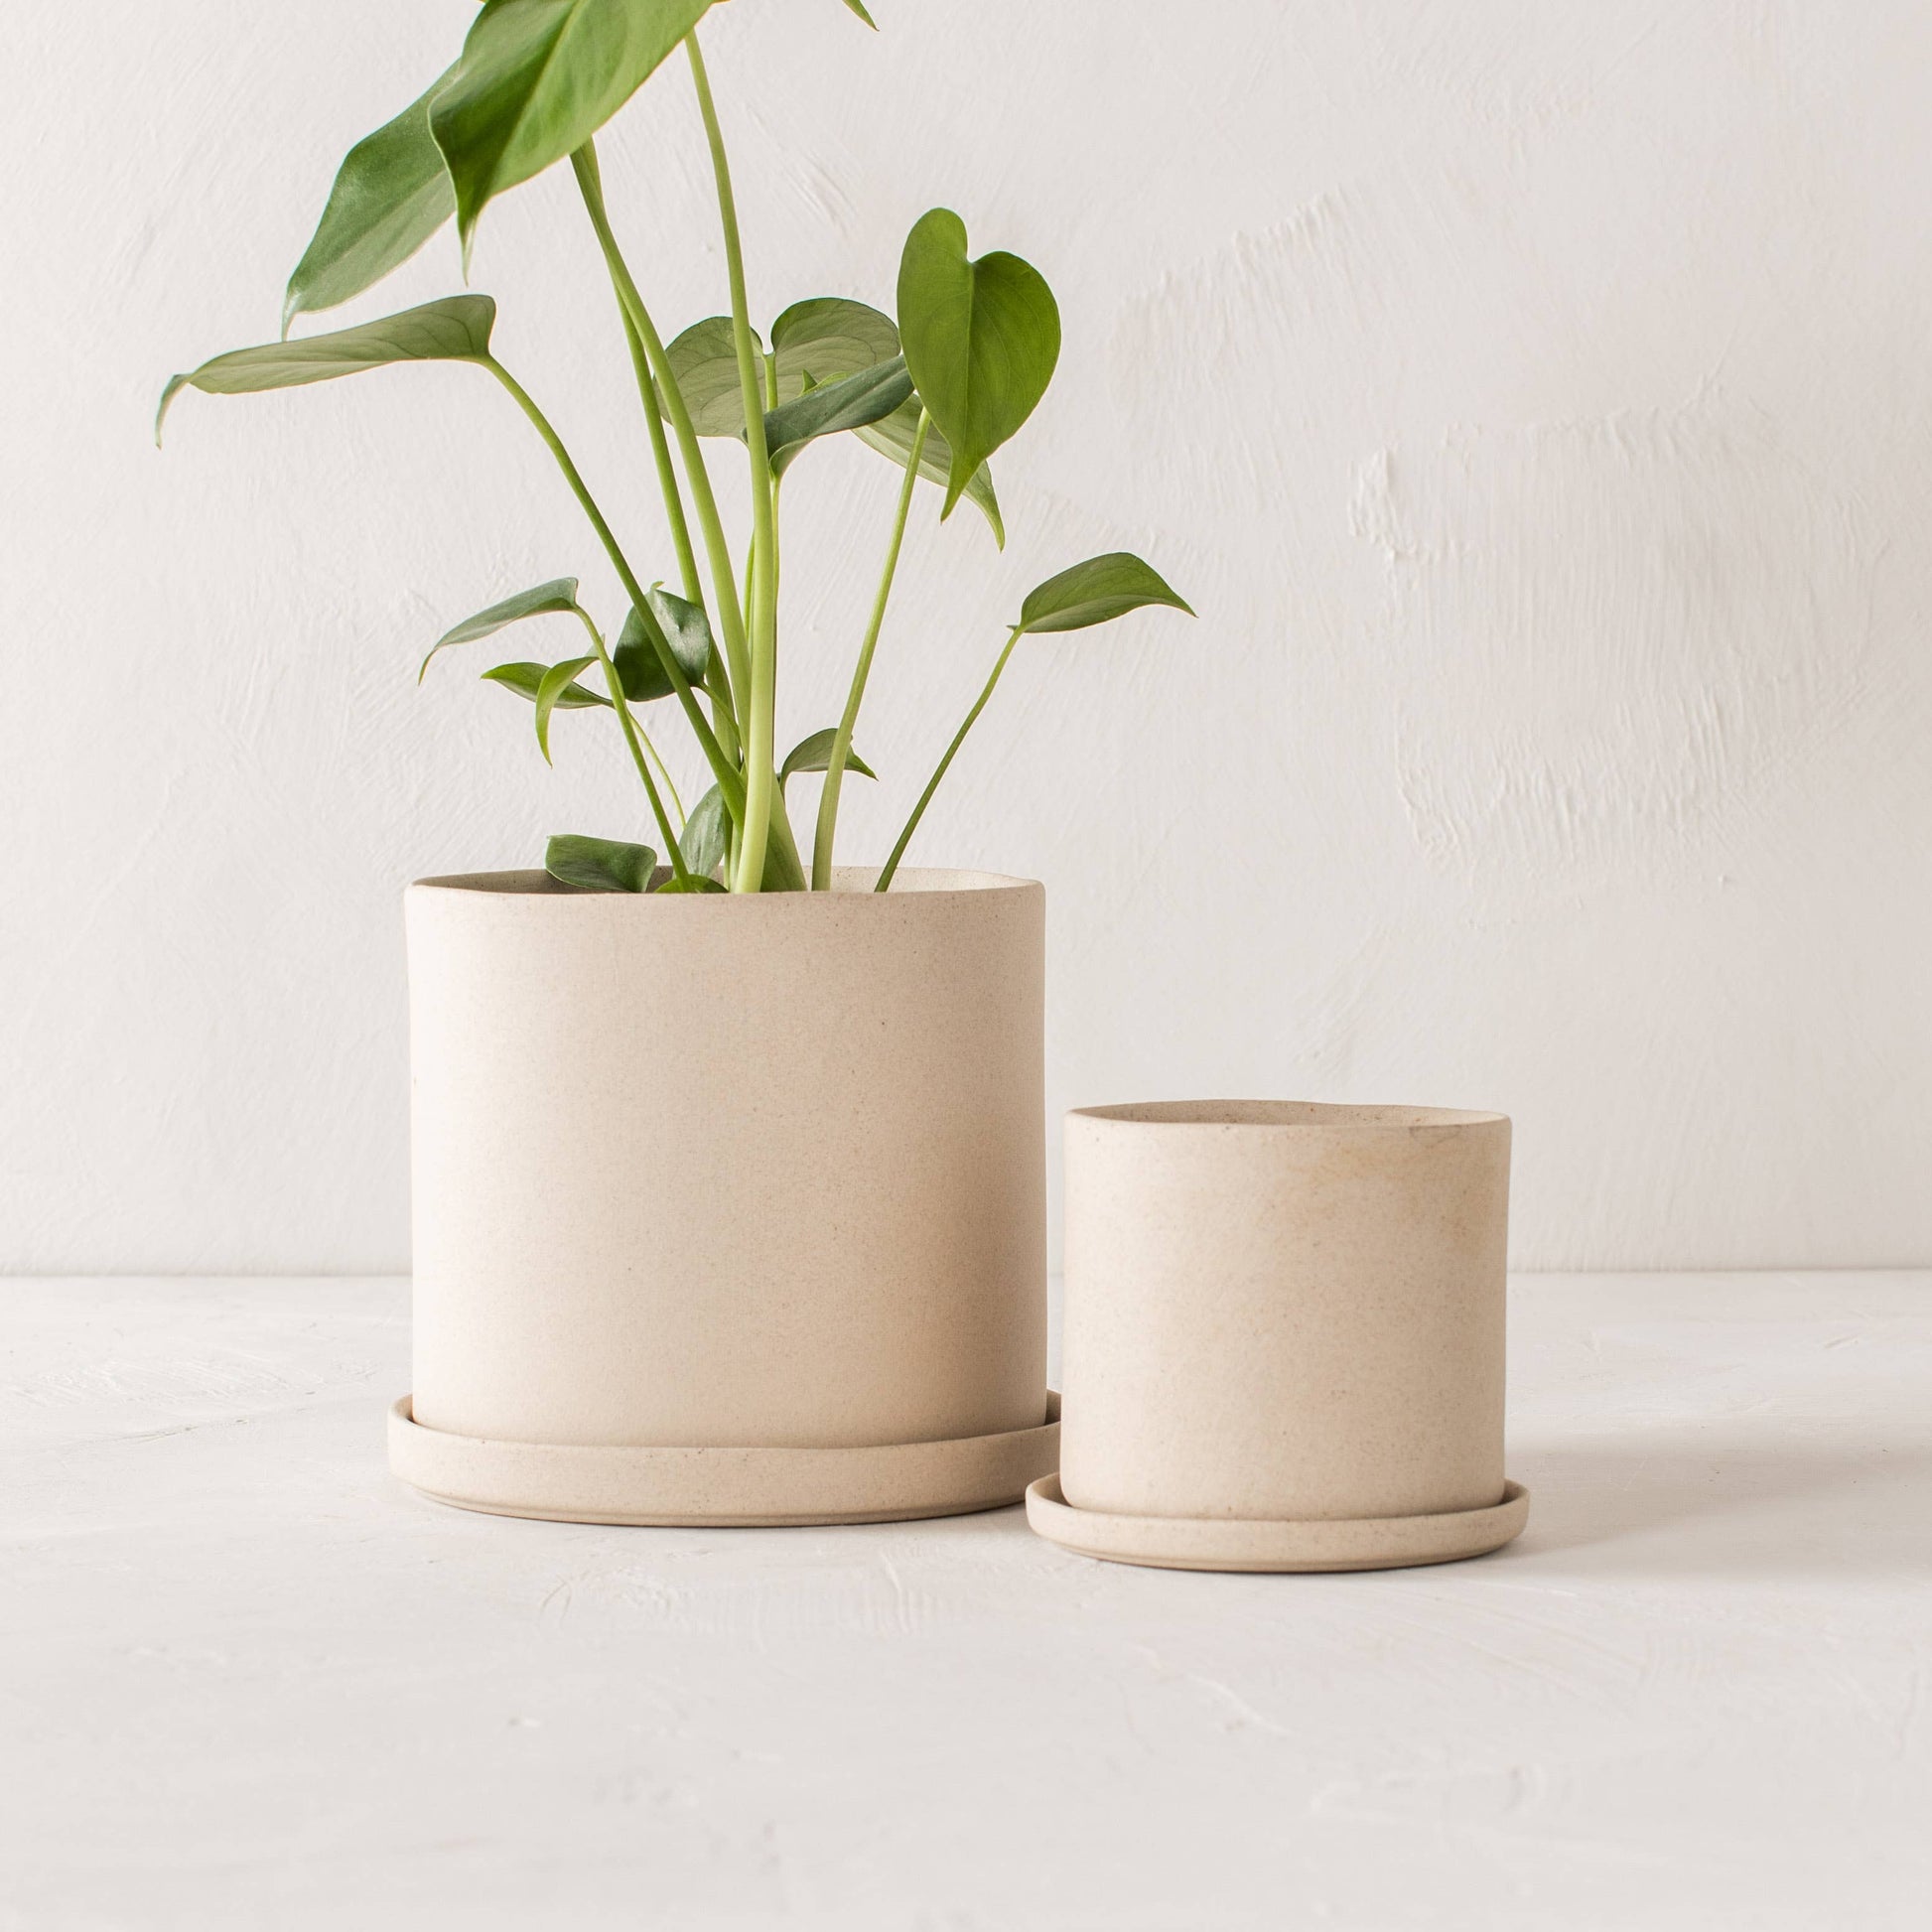 4" and 6" unglazed sand stoneware planters side by side